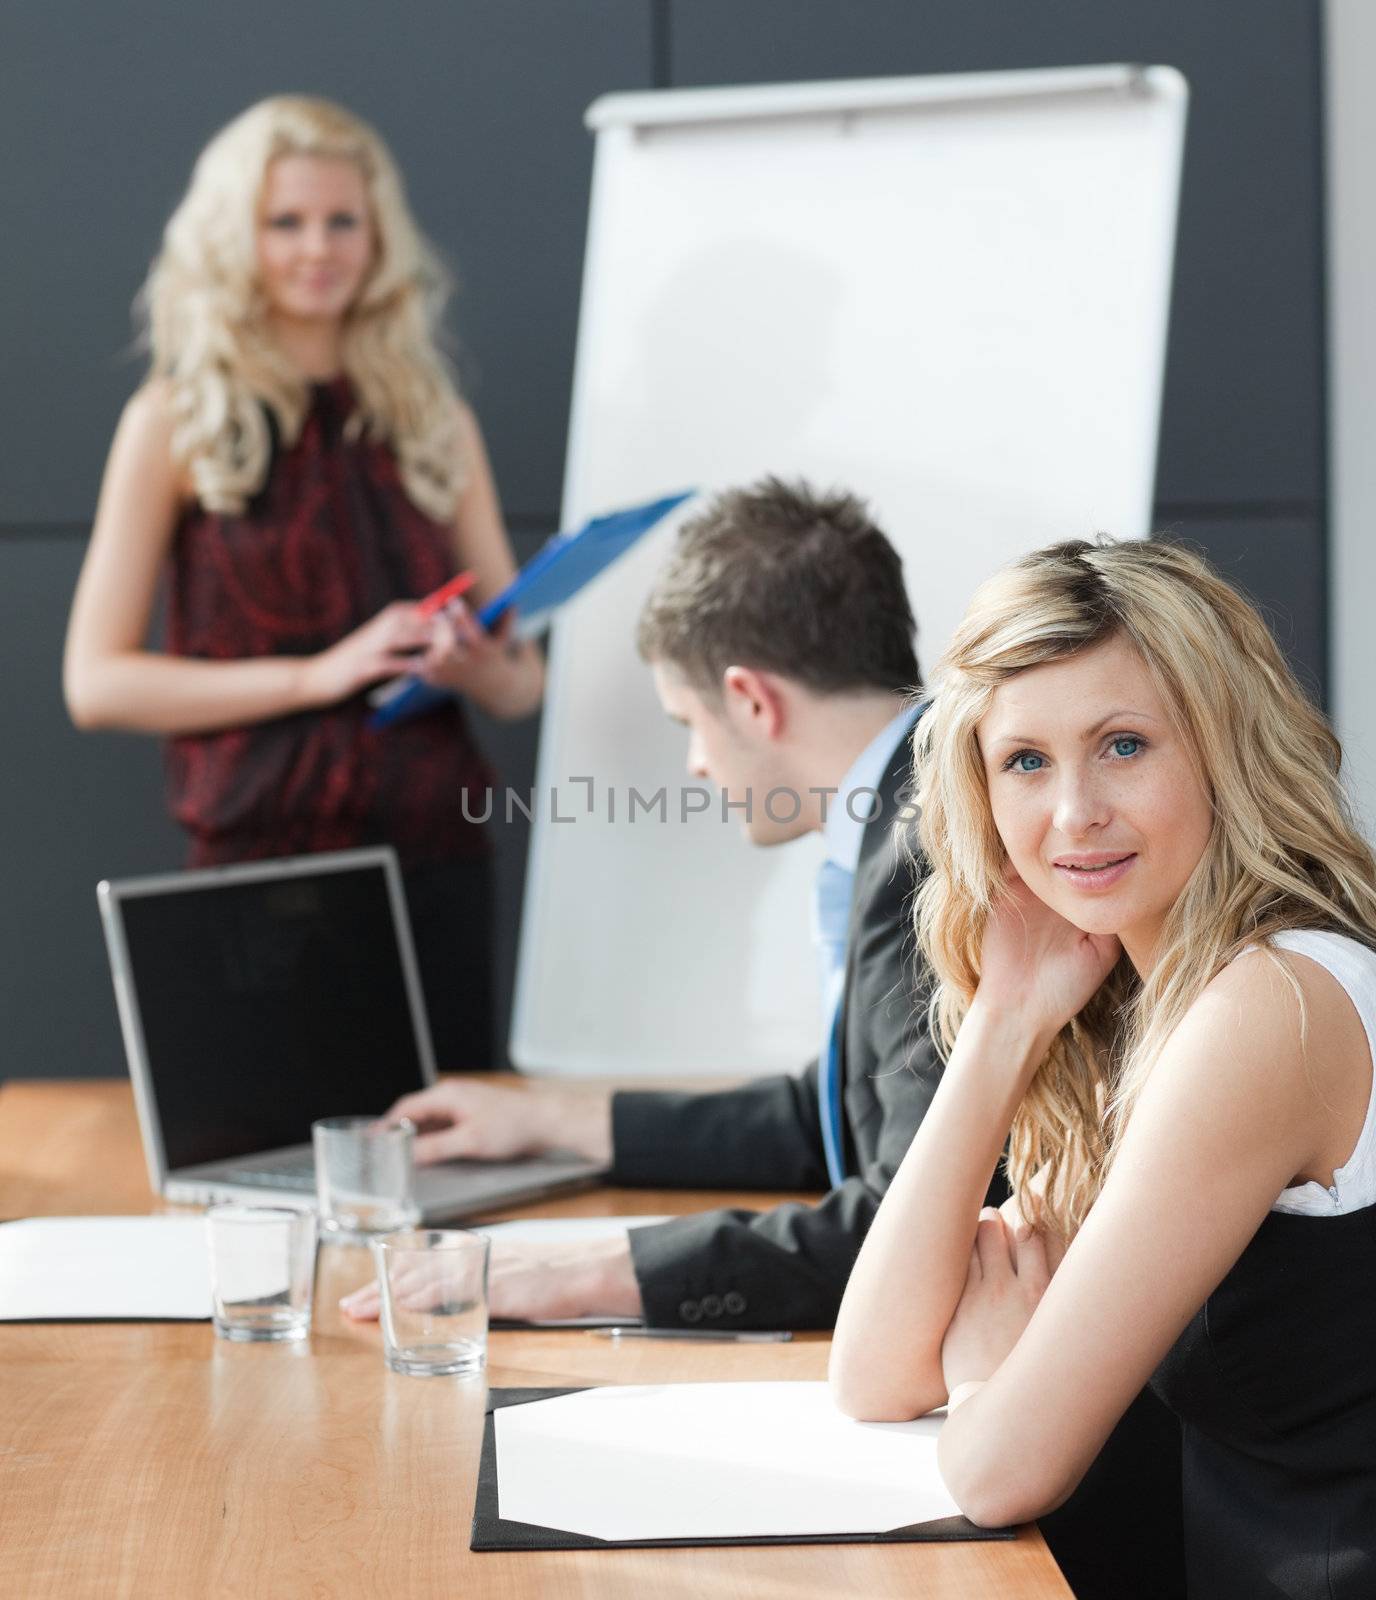 woman presenting at a business teamwork meeting